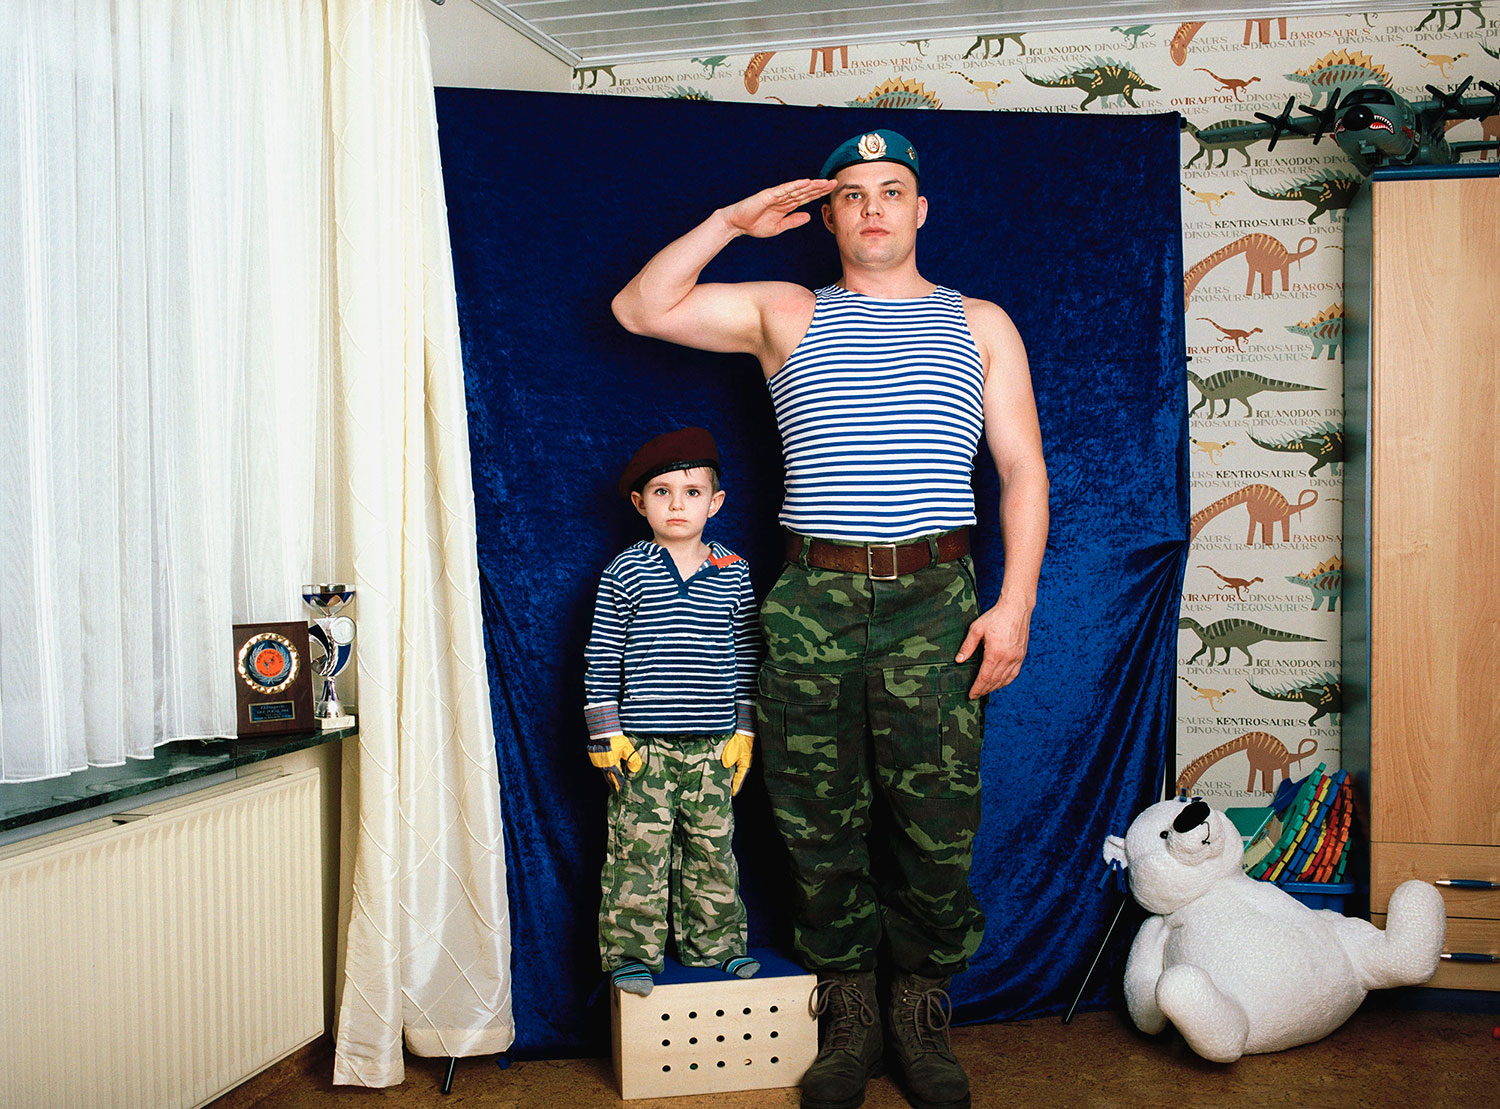 No place like home: meet the people caught between Germany and Russia